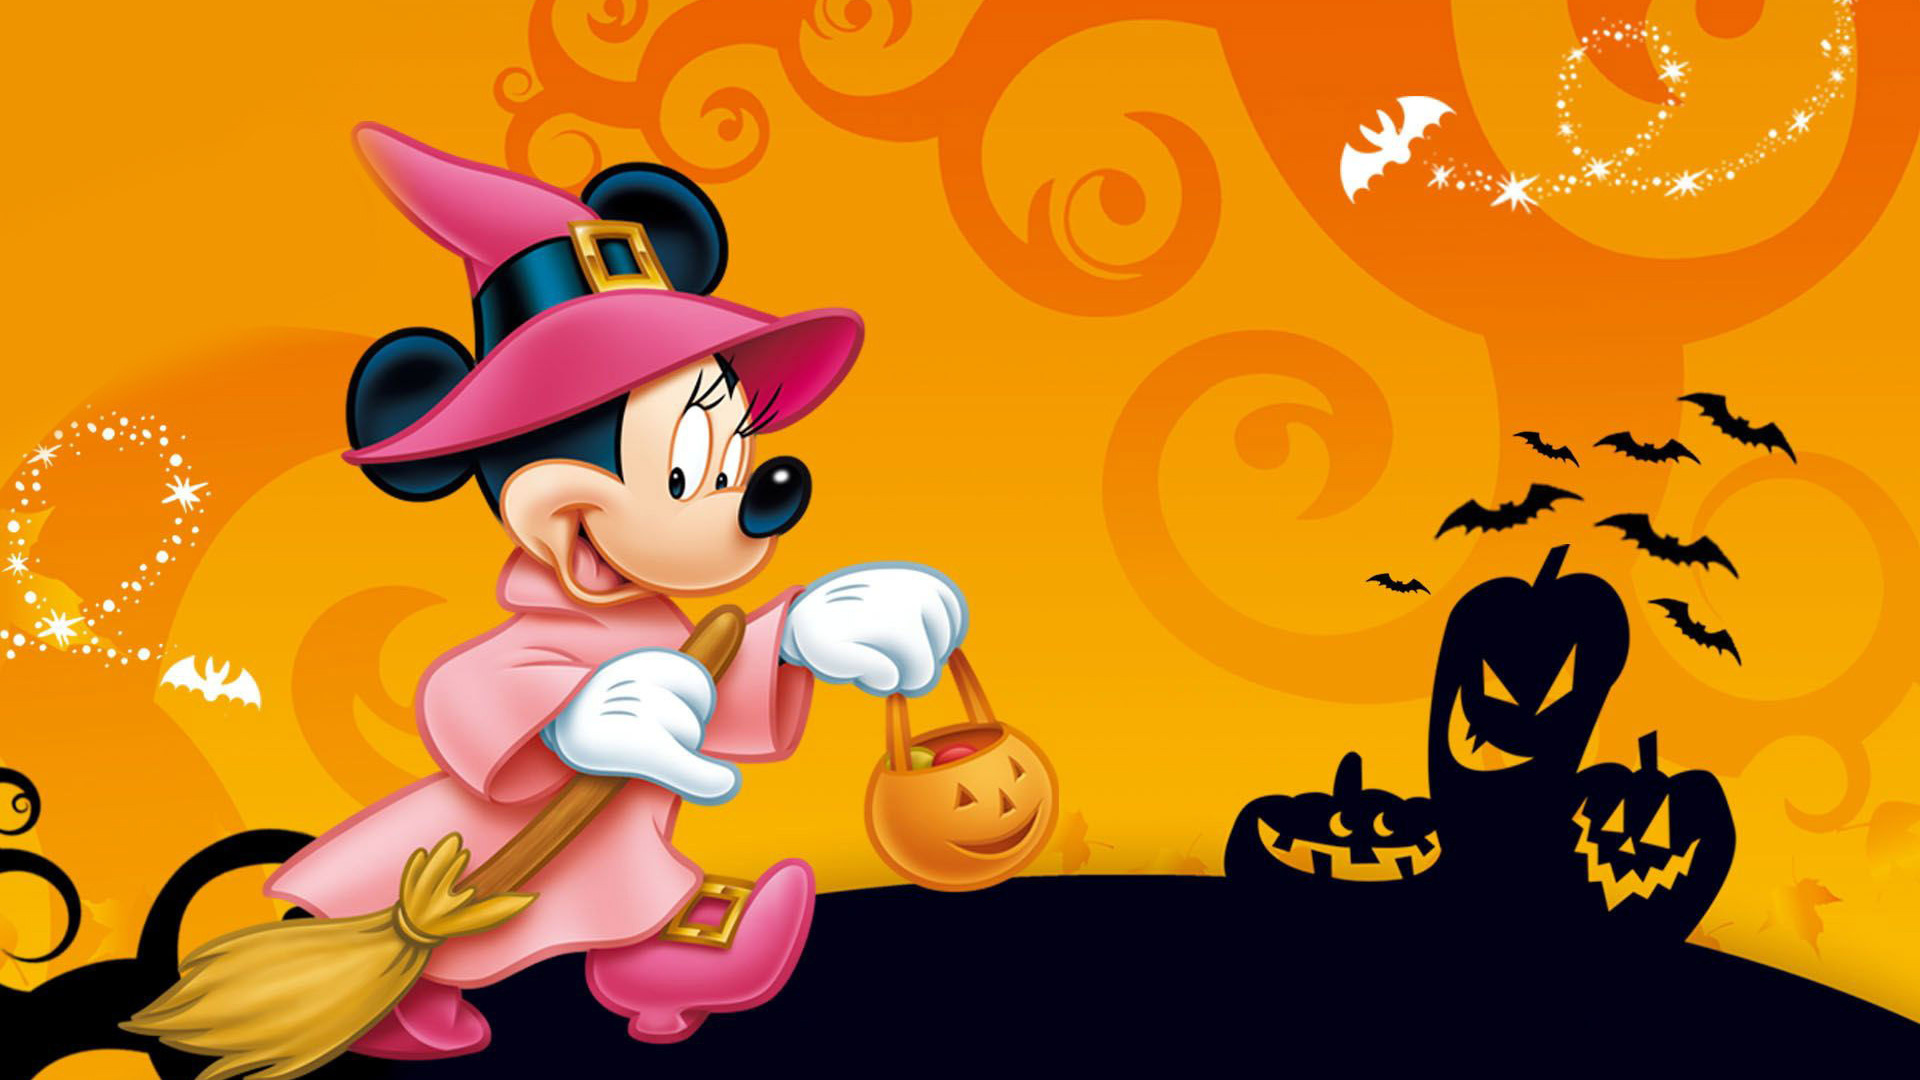 Disneys Halloween Wallpapers  GIPHY Stickers Will Add Some Spooky Fun to  Your Devices  the disney food blog